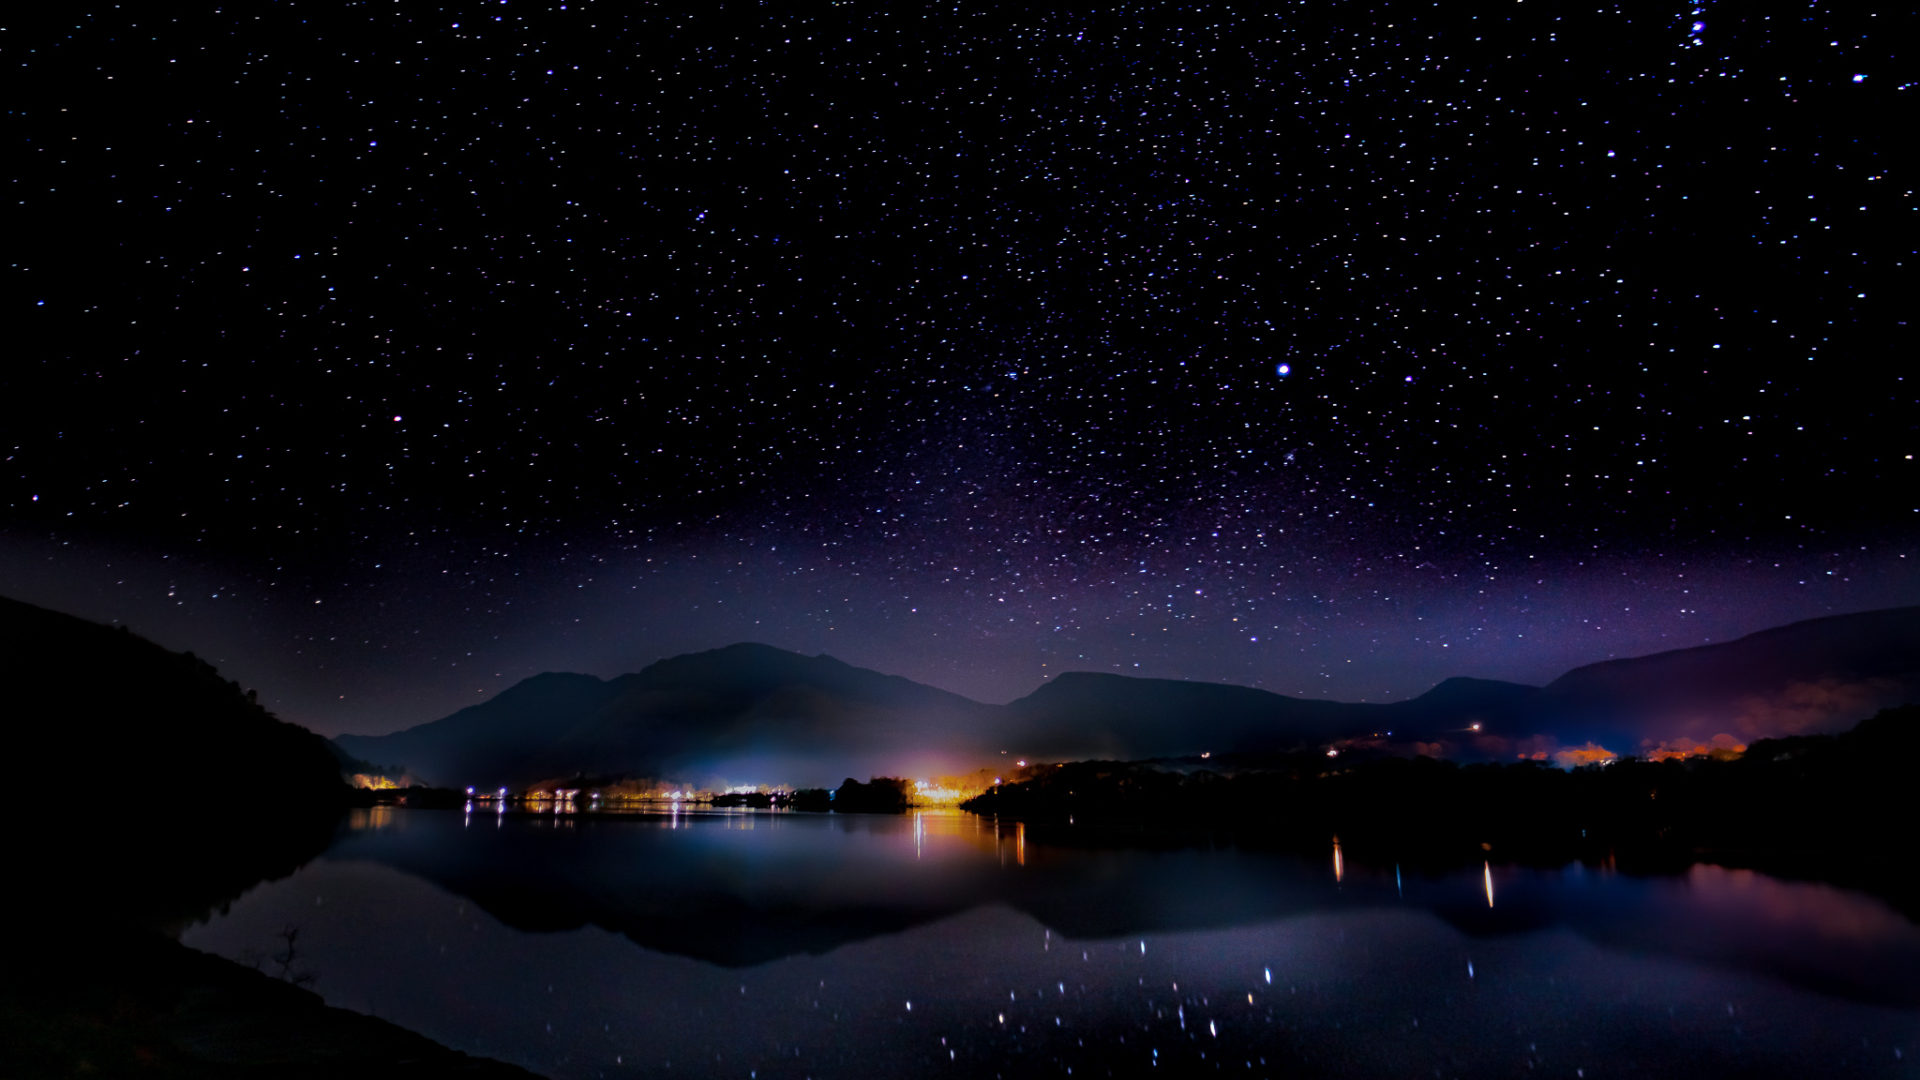 A lake at night under stars with pink and purple lights from the town on the otherside